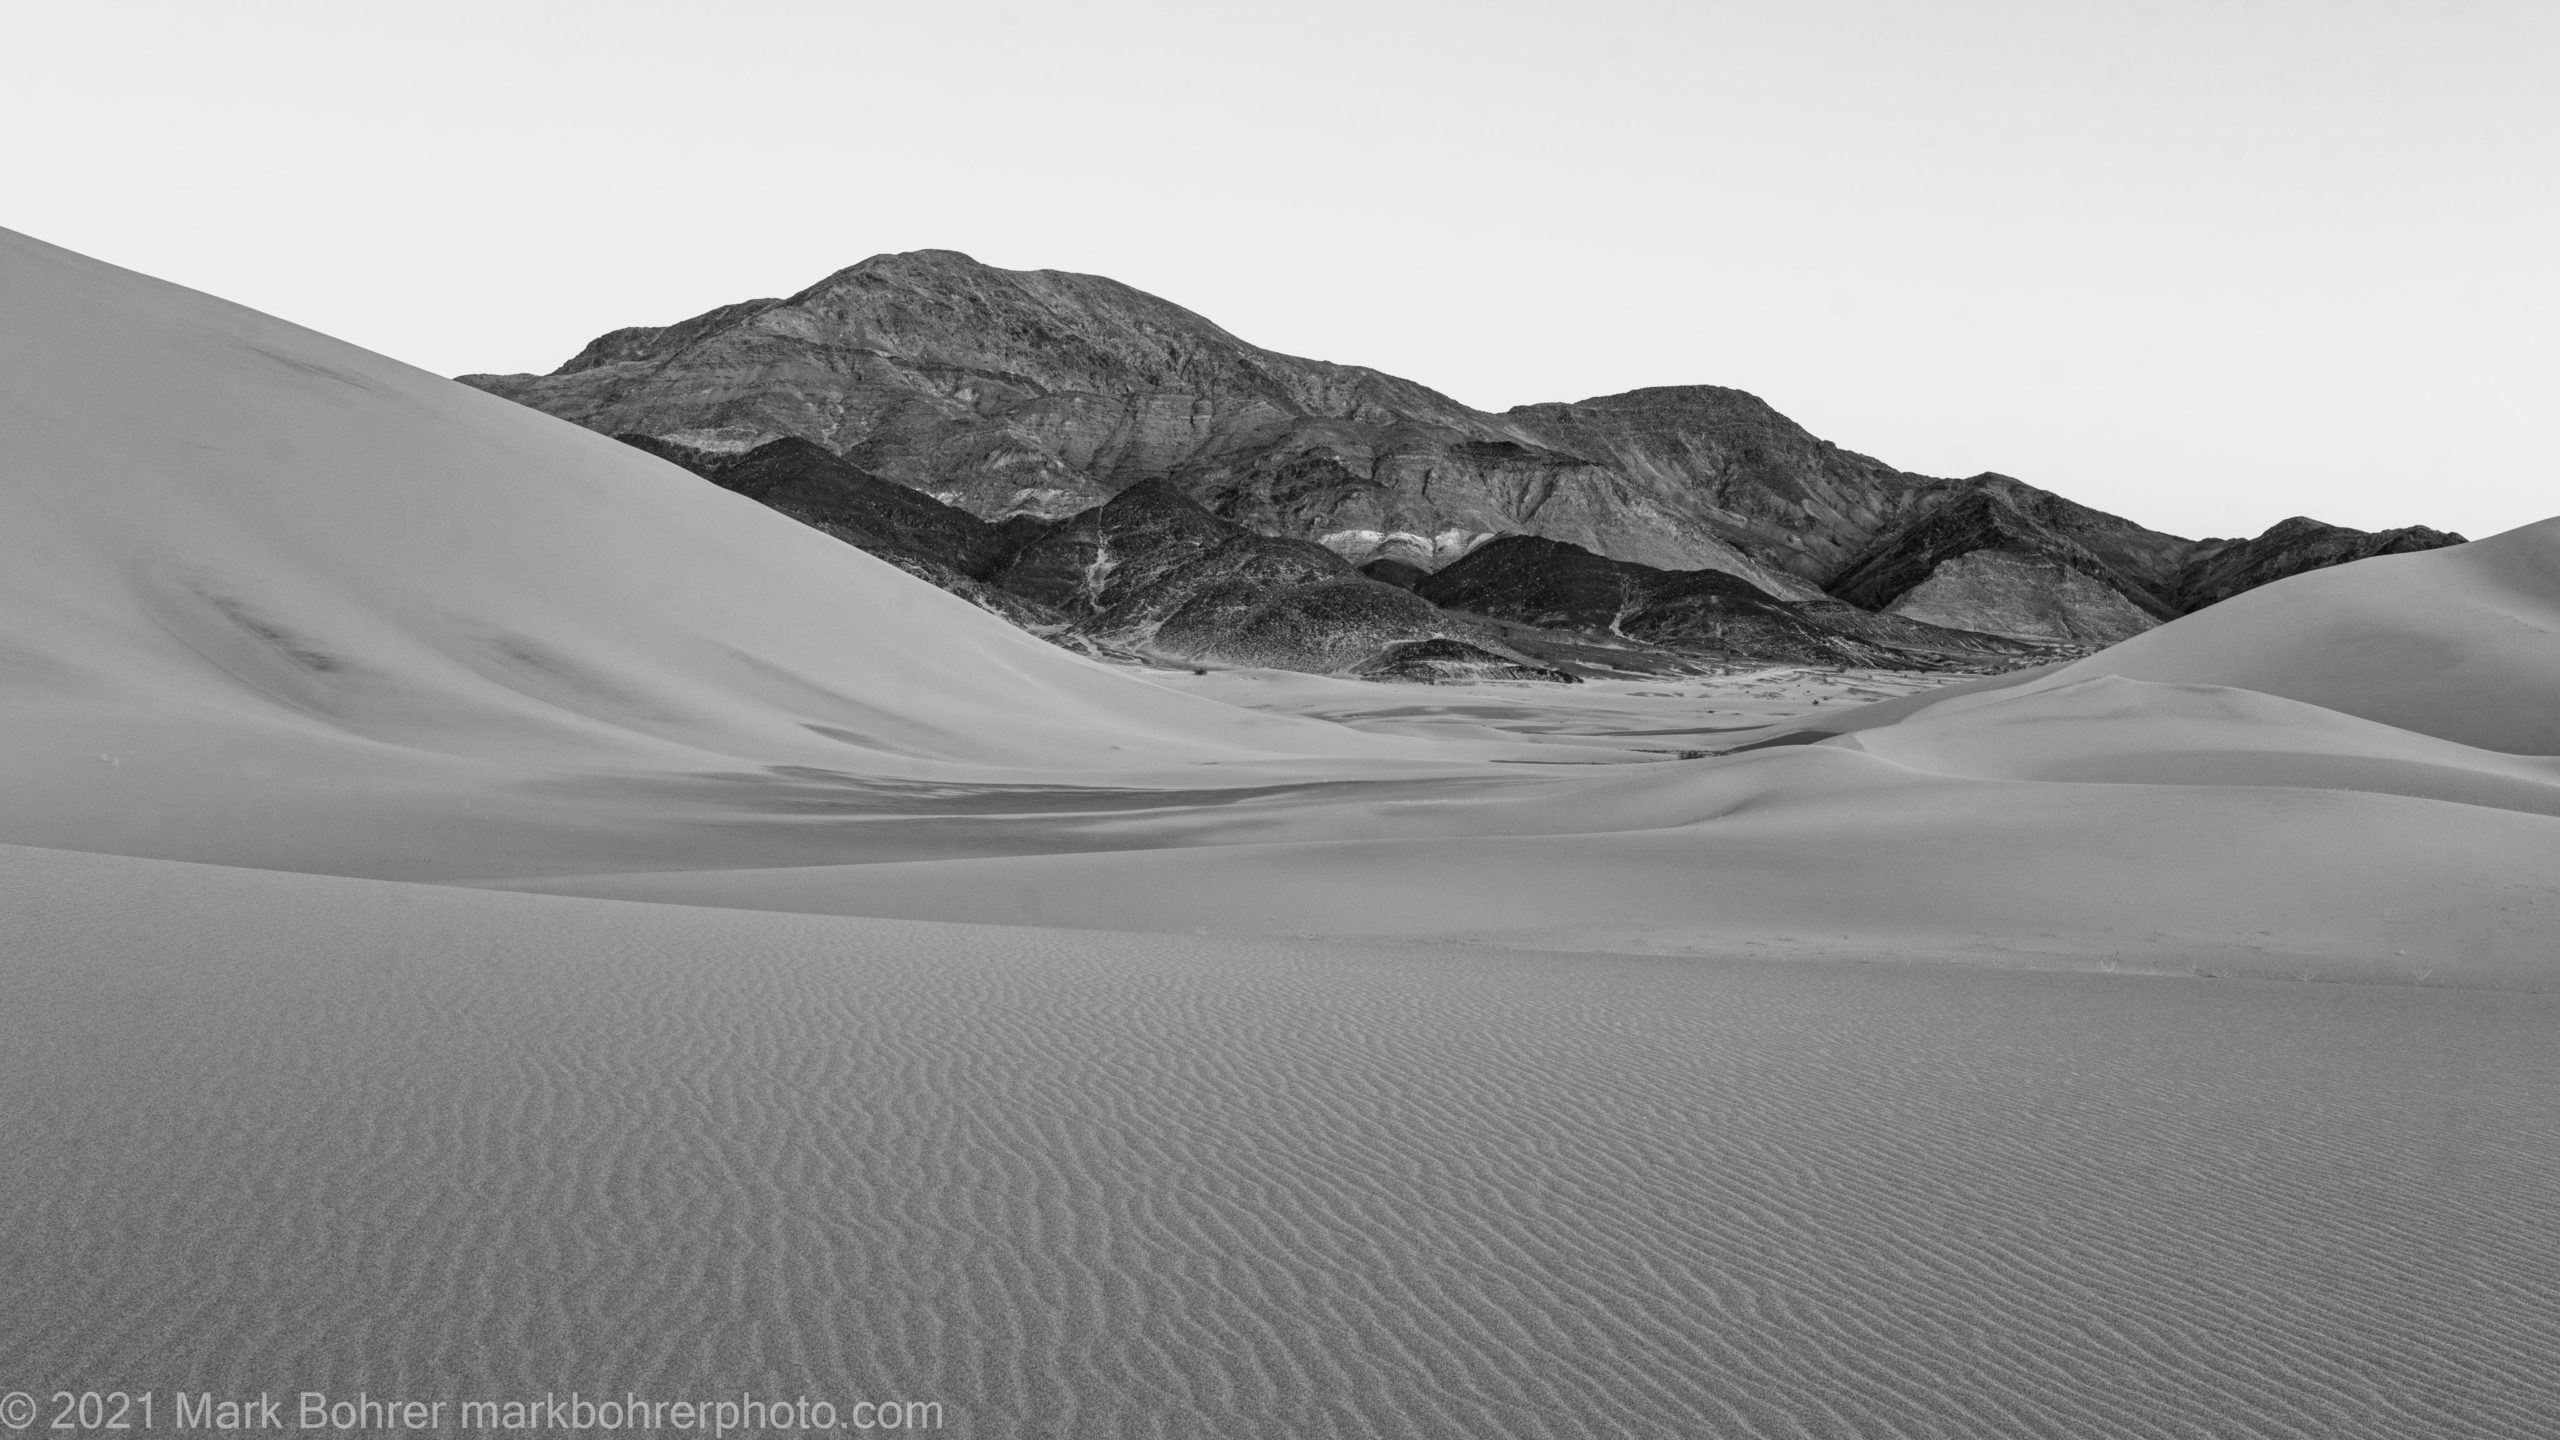 End of the day in black and white - Ibex Dunes, Death Valley